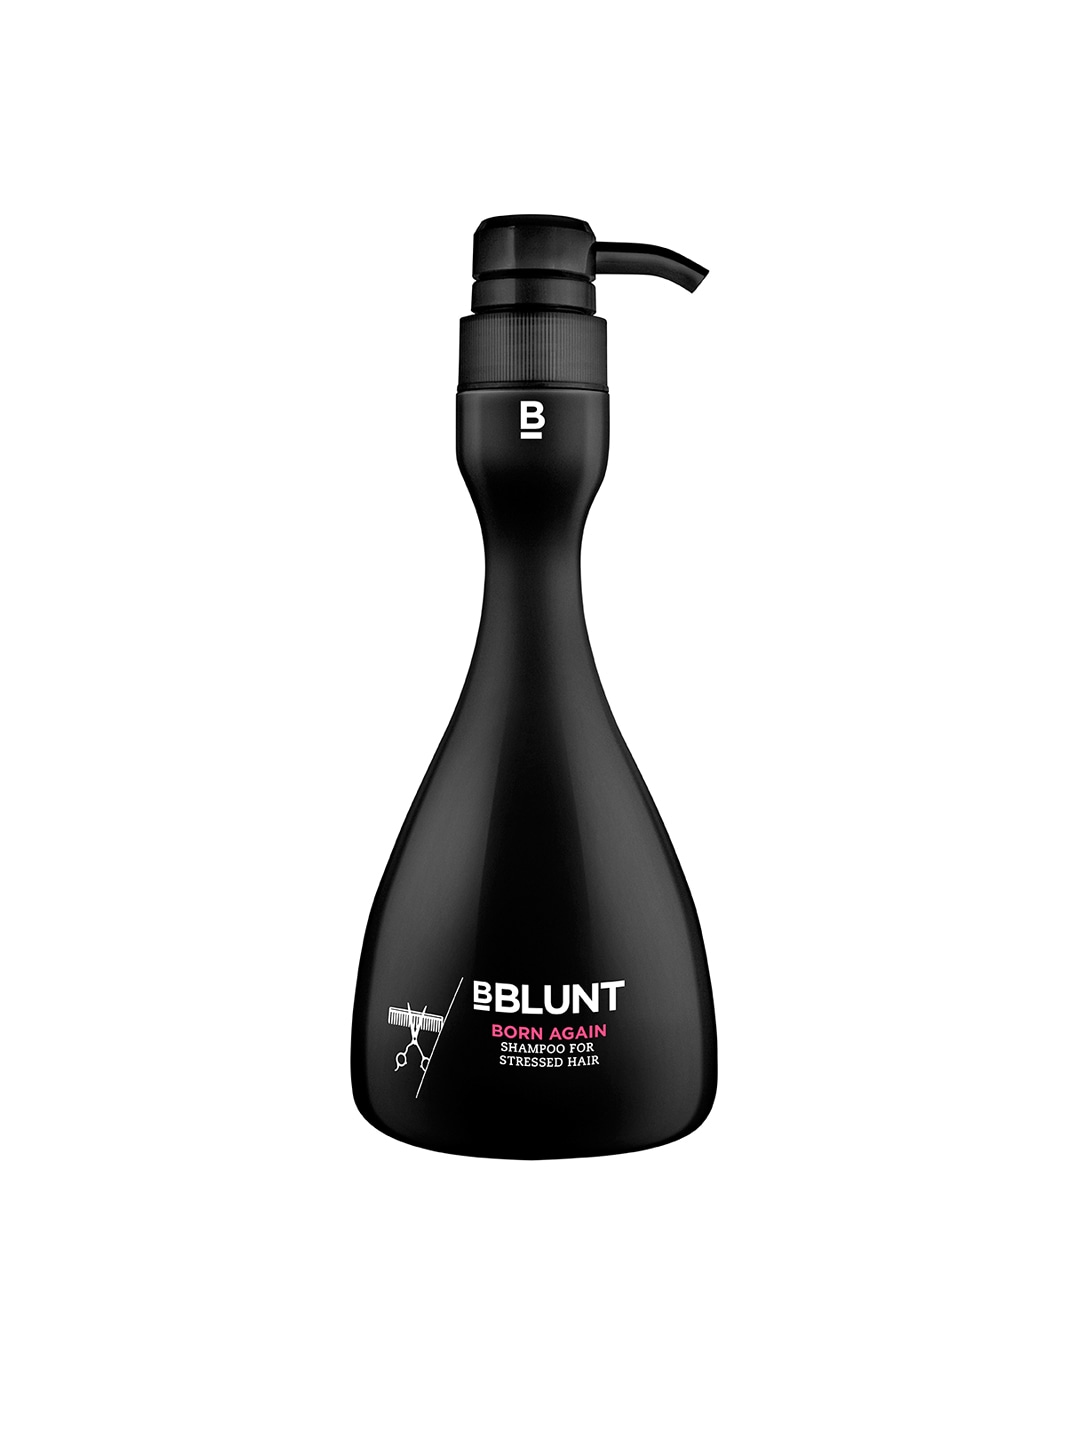 BBLUNT Born Again Shampoo for Stressed Hair 400 ml Price in India